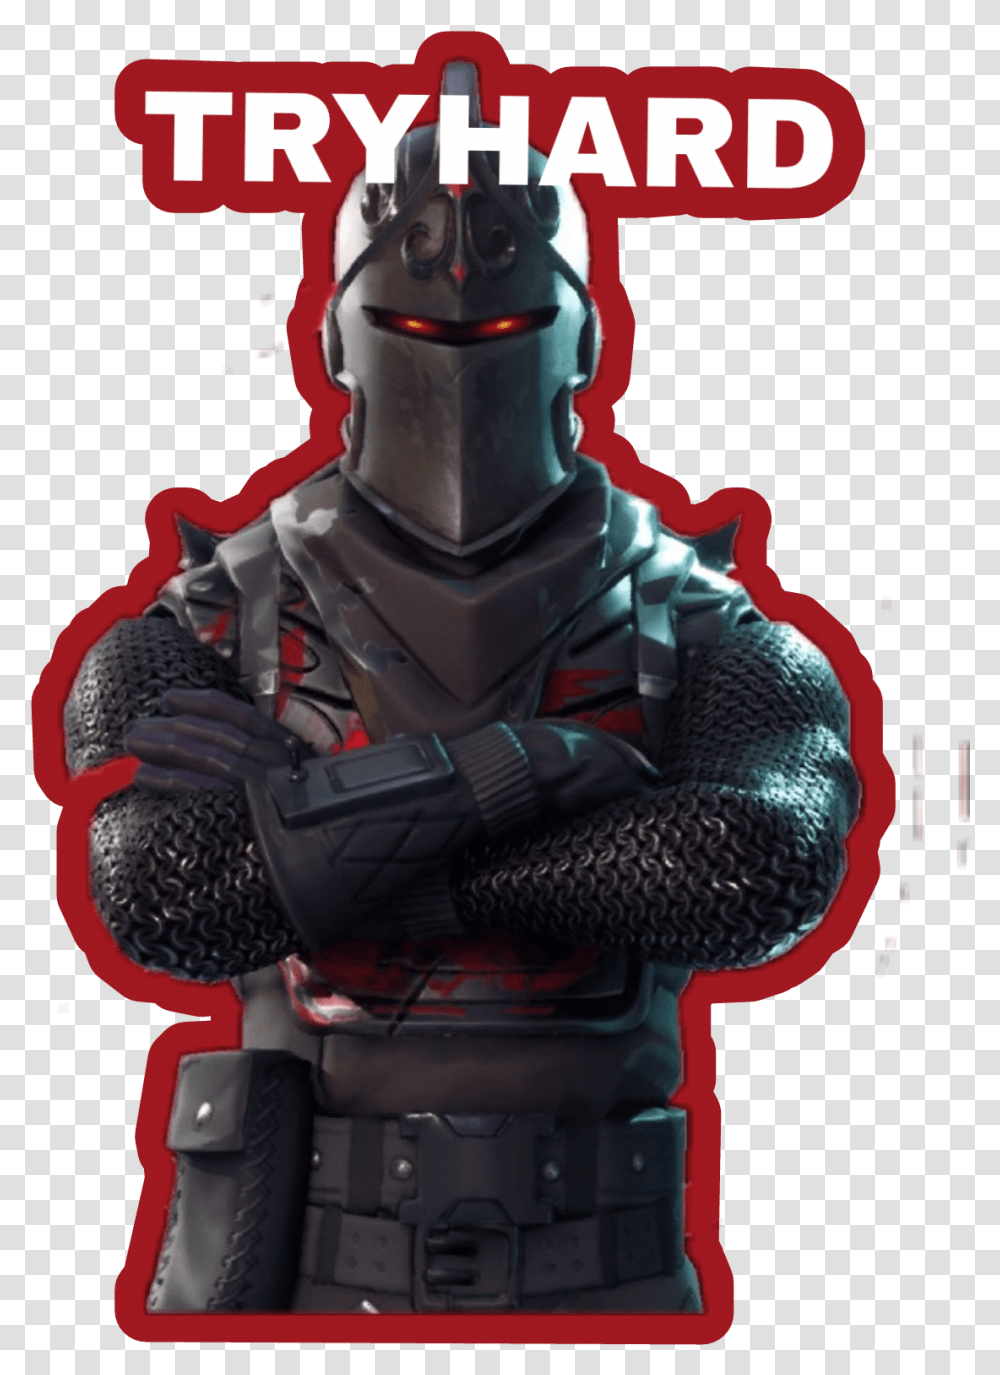 Tryhard Vector Black Knight Fortnite, Armor, Toy, Robot Transparent Png